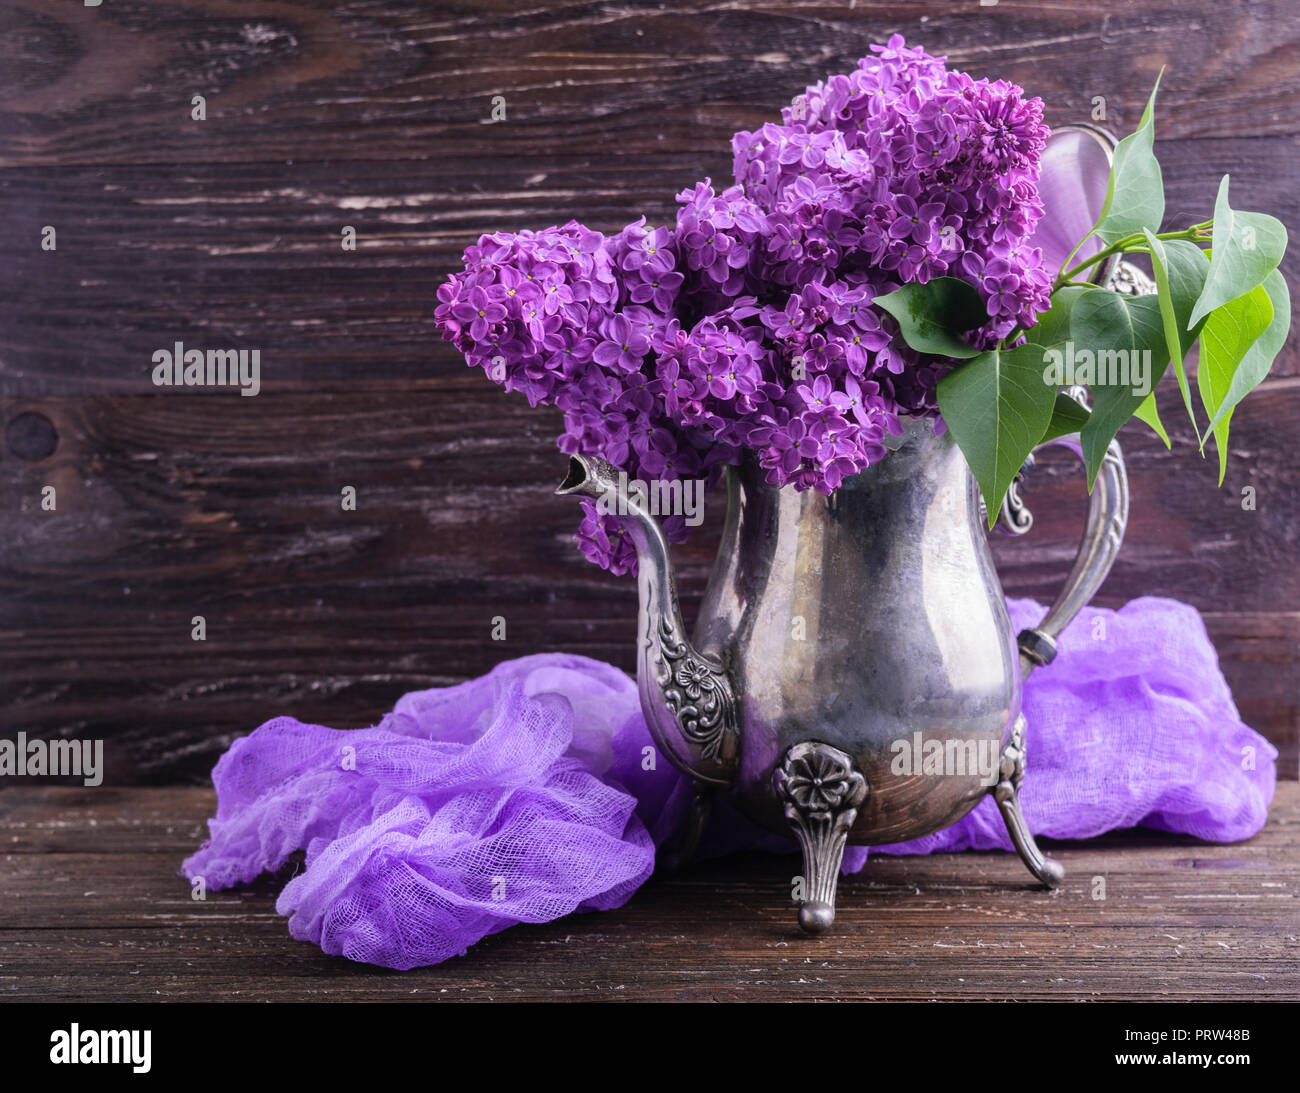 Bouquet of purple lilac flowers in vintage decorative teapot with purple dyed gauze fabric. Dark brown wooden background. Spring romantic flowers deco Stock Photo